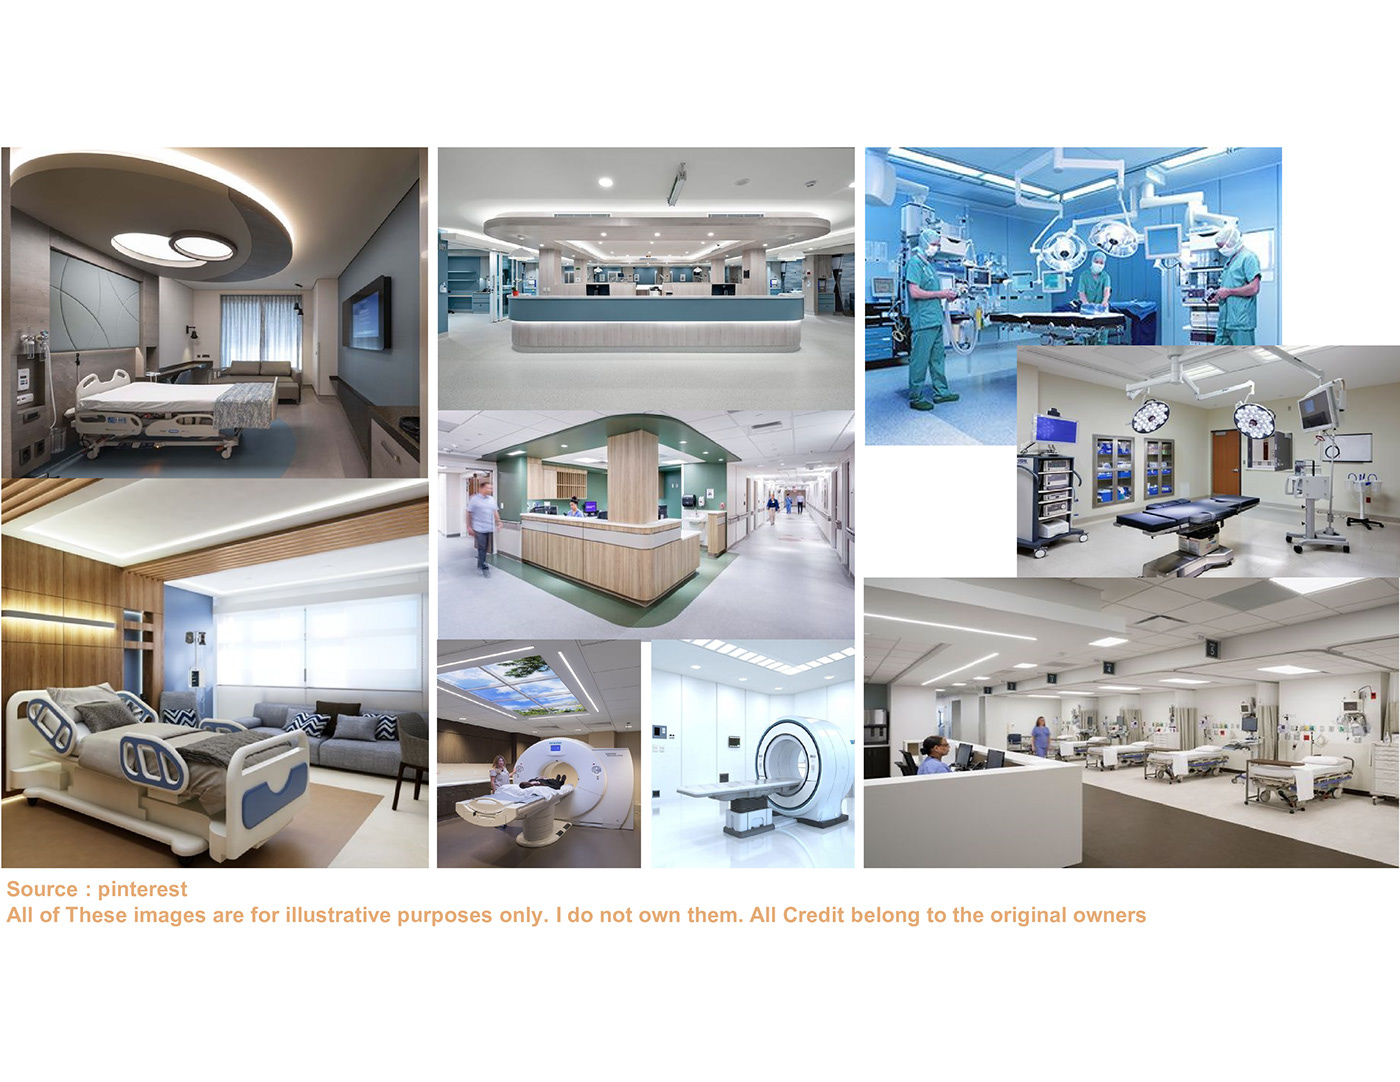 architecture visualization 3ds max modern hospitality design commercial hospital cardiac surgery hospitals design